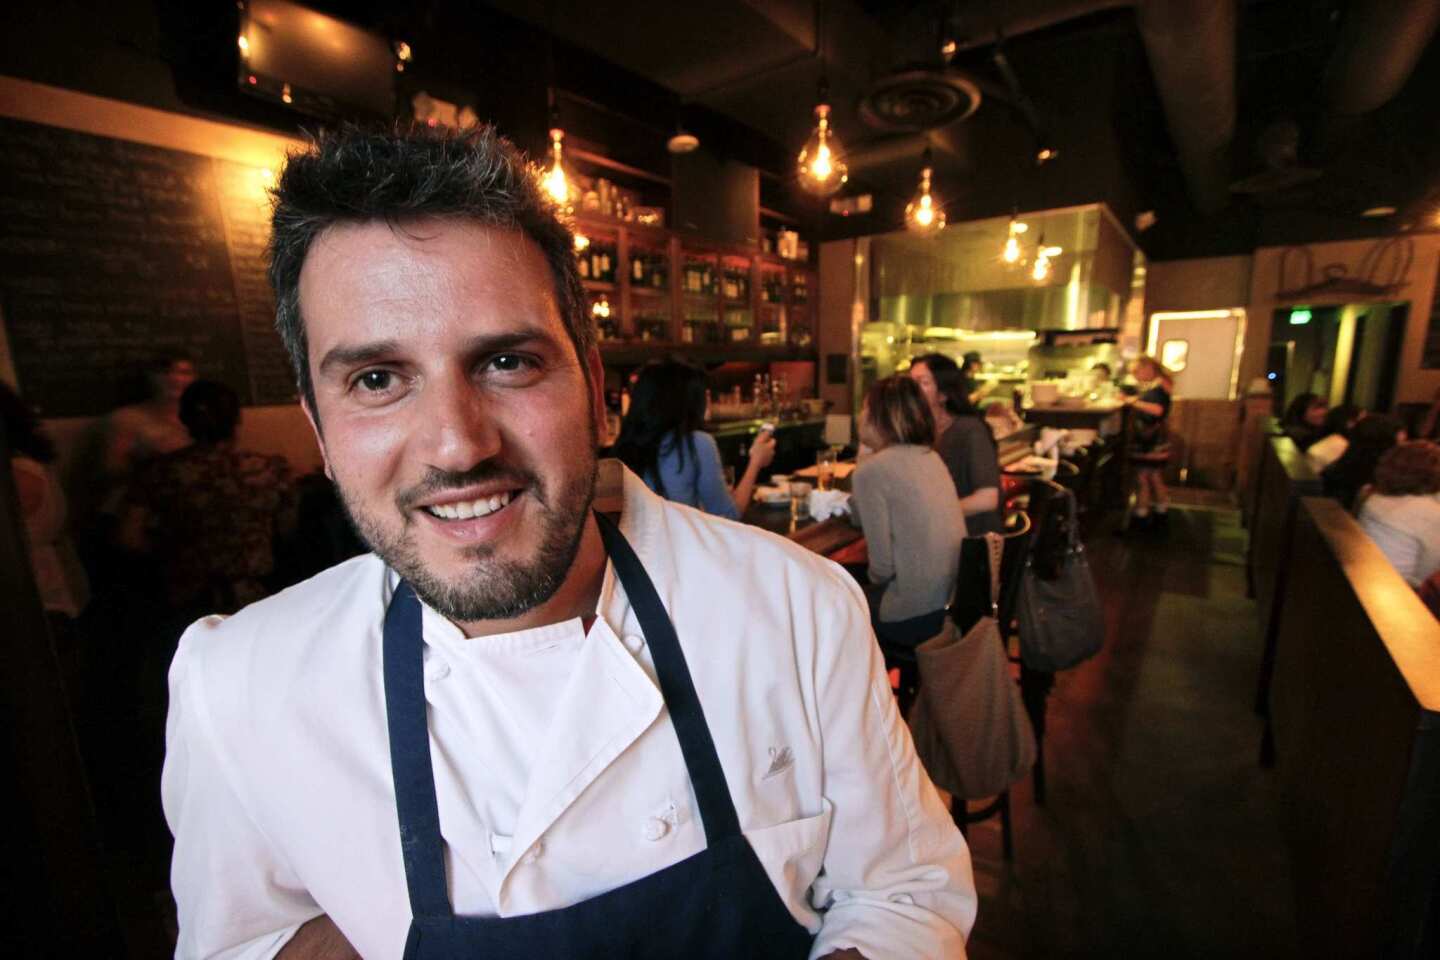 New chef Perfecto Rocher is in transition at Lazy Ox Canteen until his new paella restaurant opens in Santa Monica.